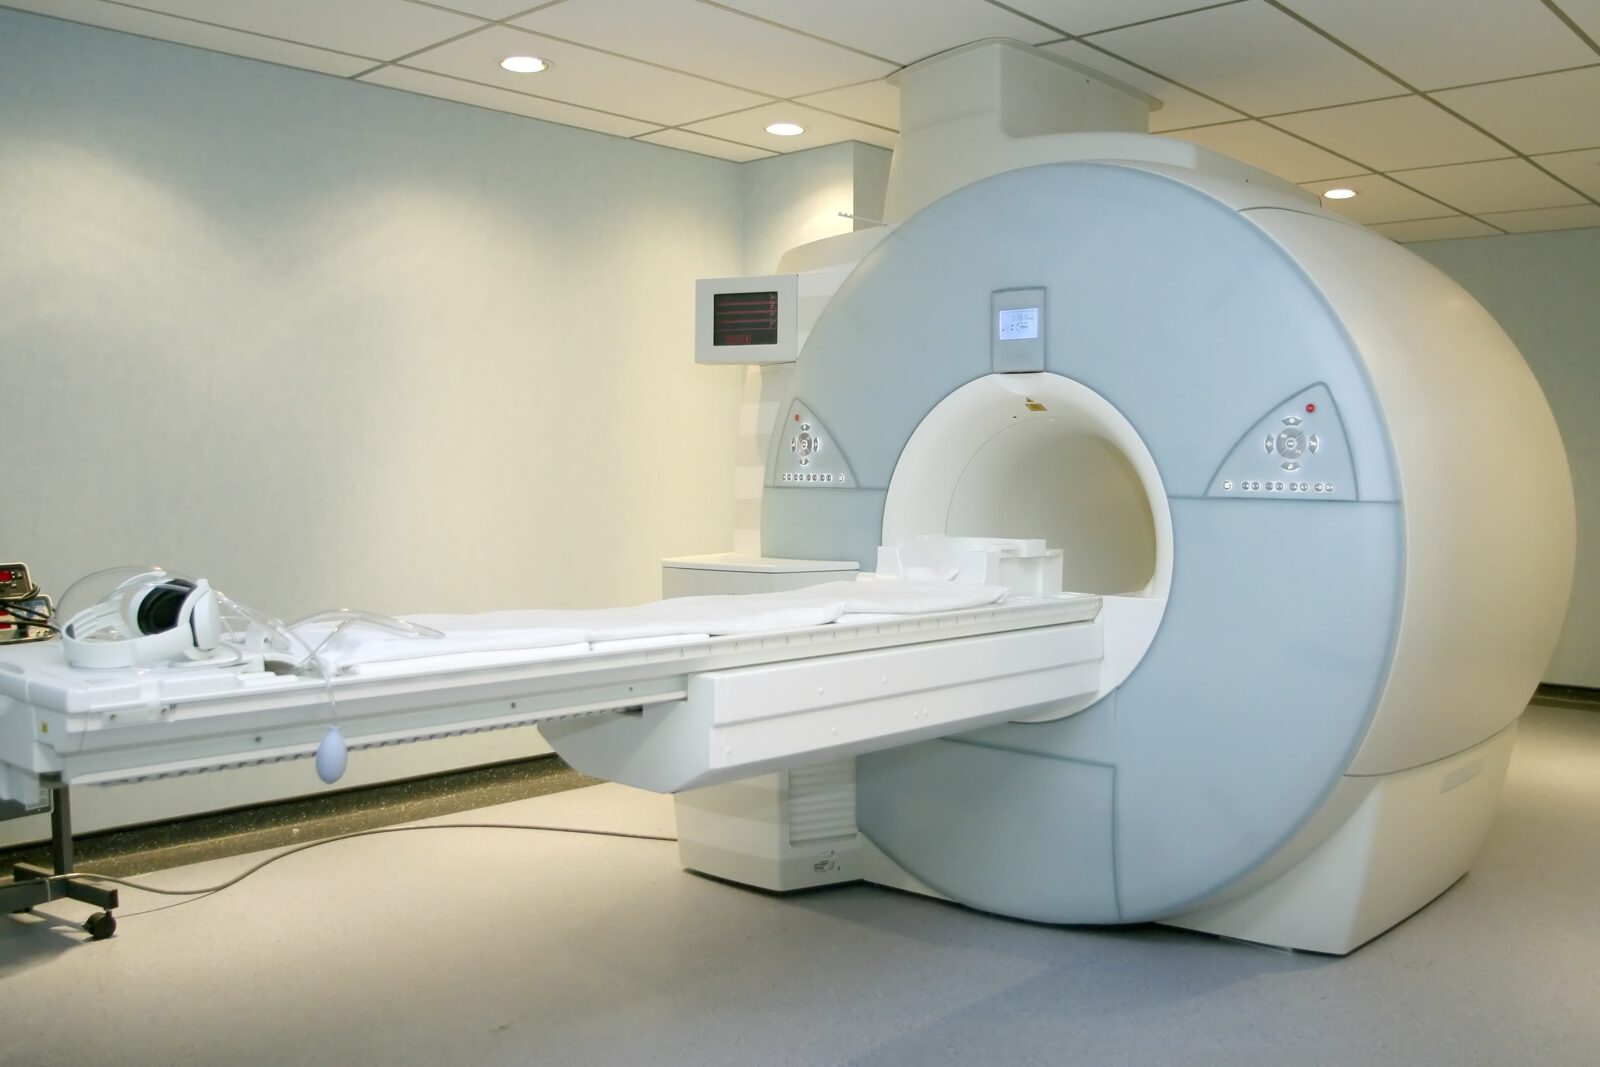 A sophisticated MRI Scanner at hospital.
